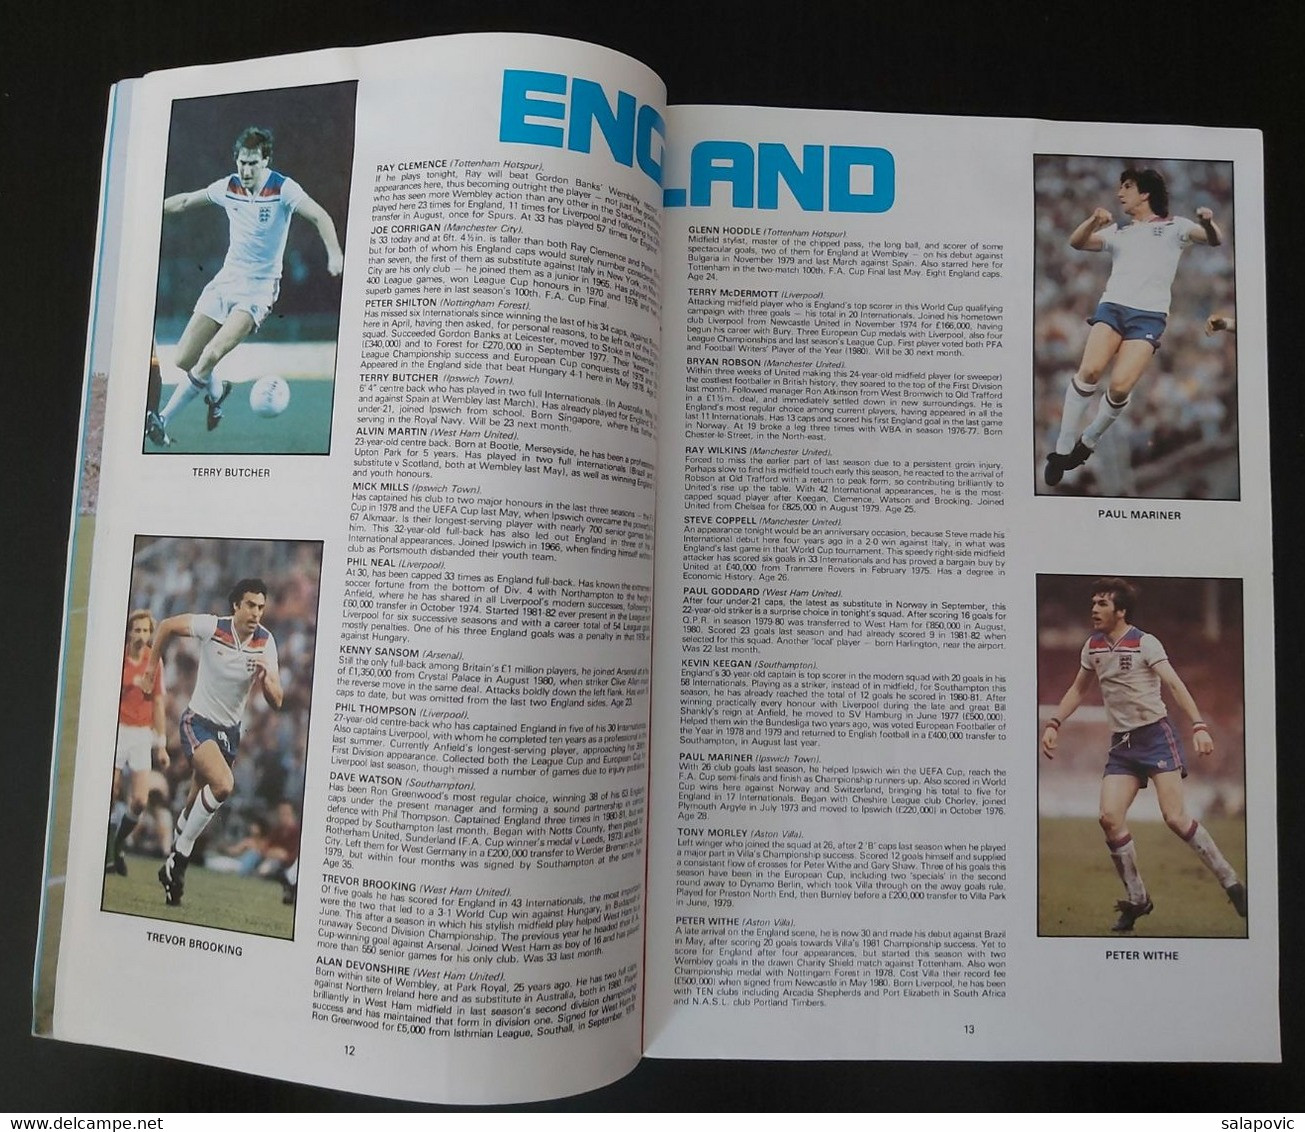 1981 ENGLAND V HUNGARY OFFICIAL MATCH PROGRAMME 18/11/1981 WORLD CUP QUALIFIER, FOOTBALL - Livres